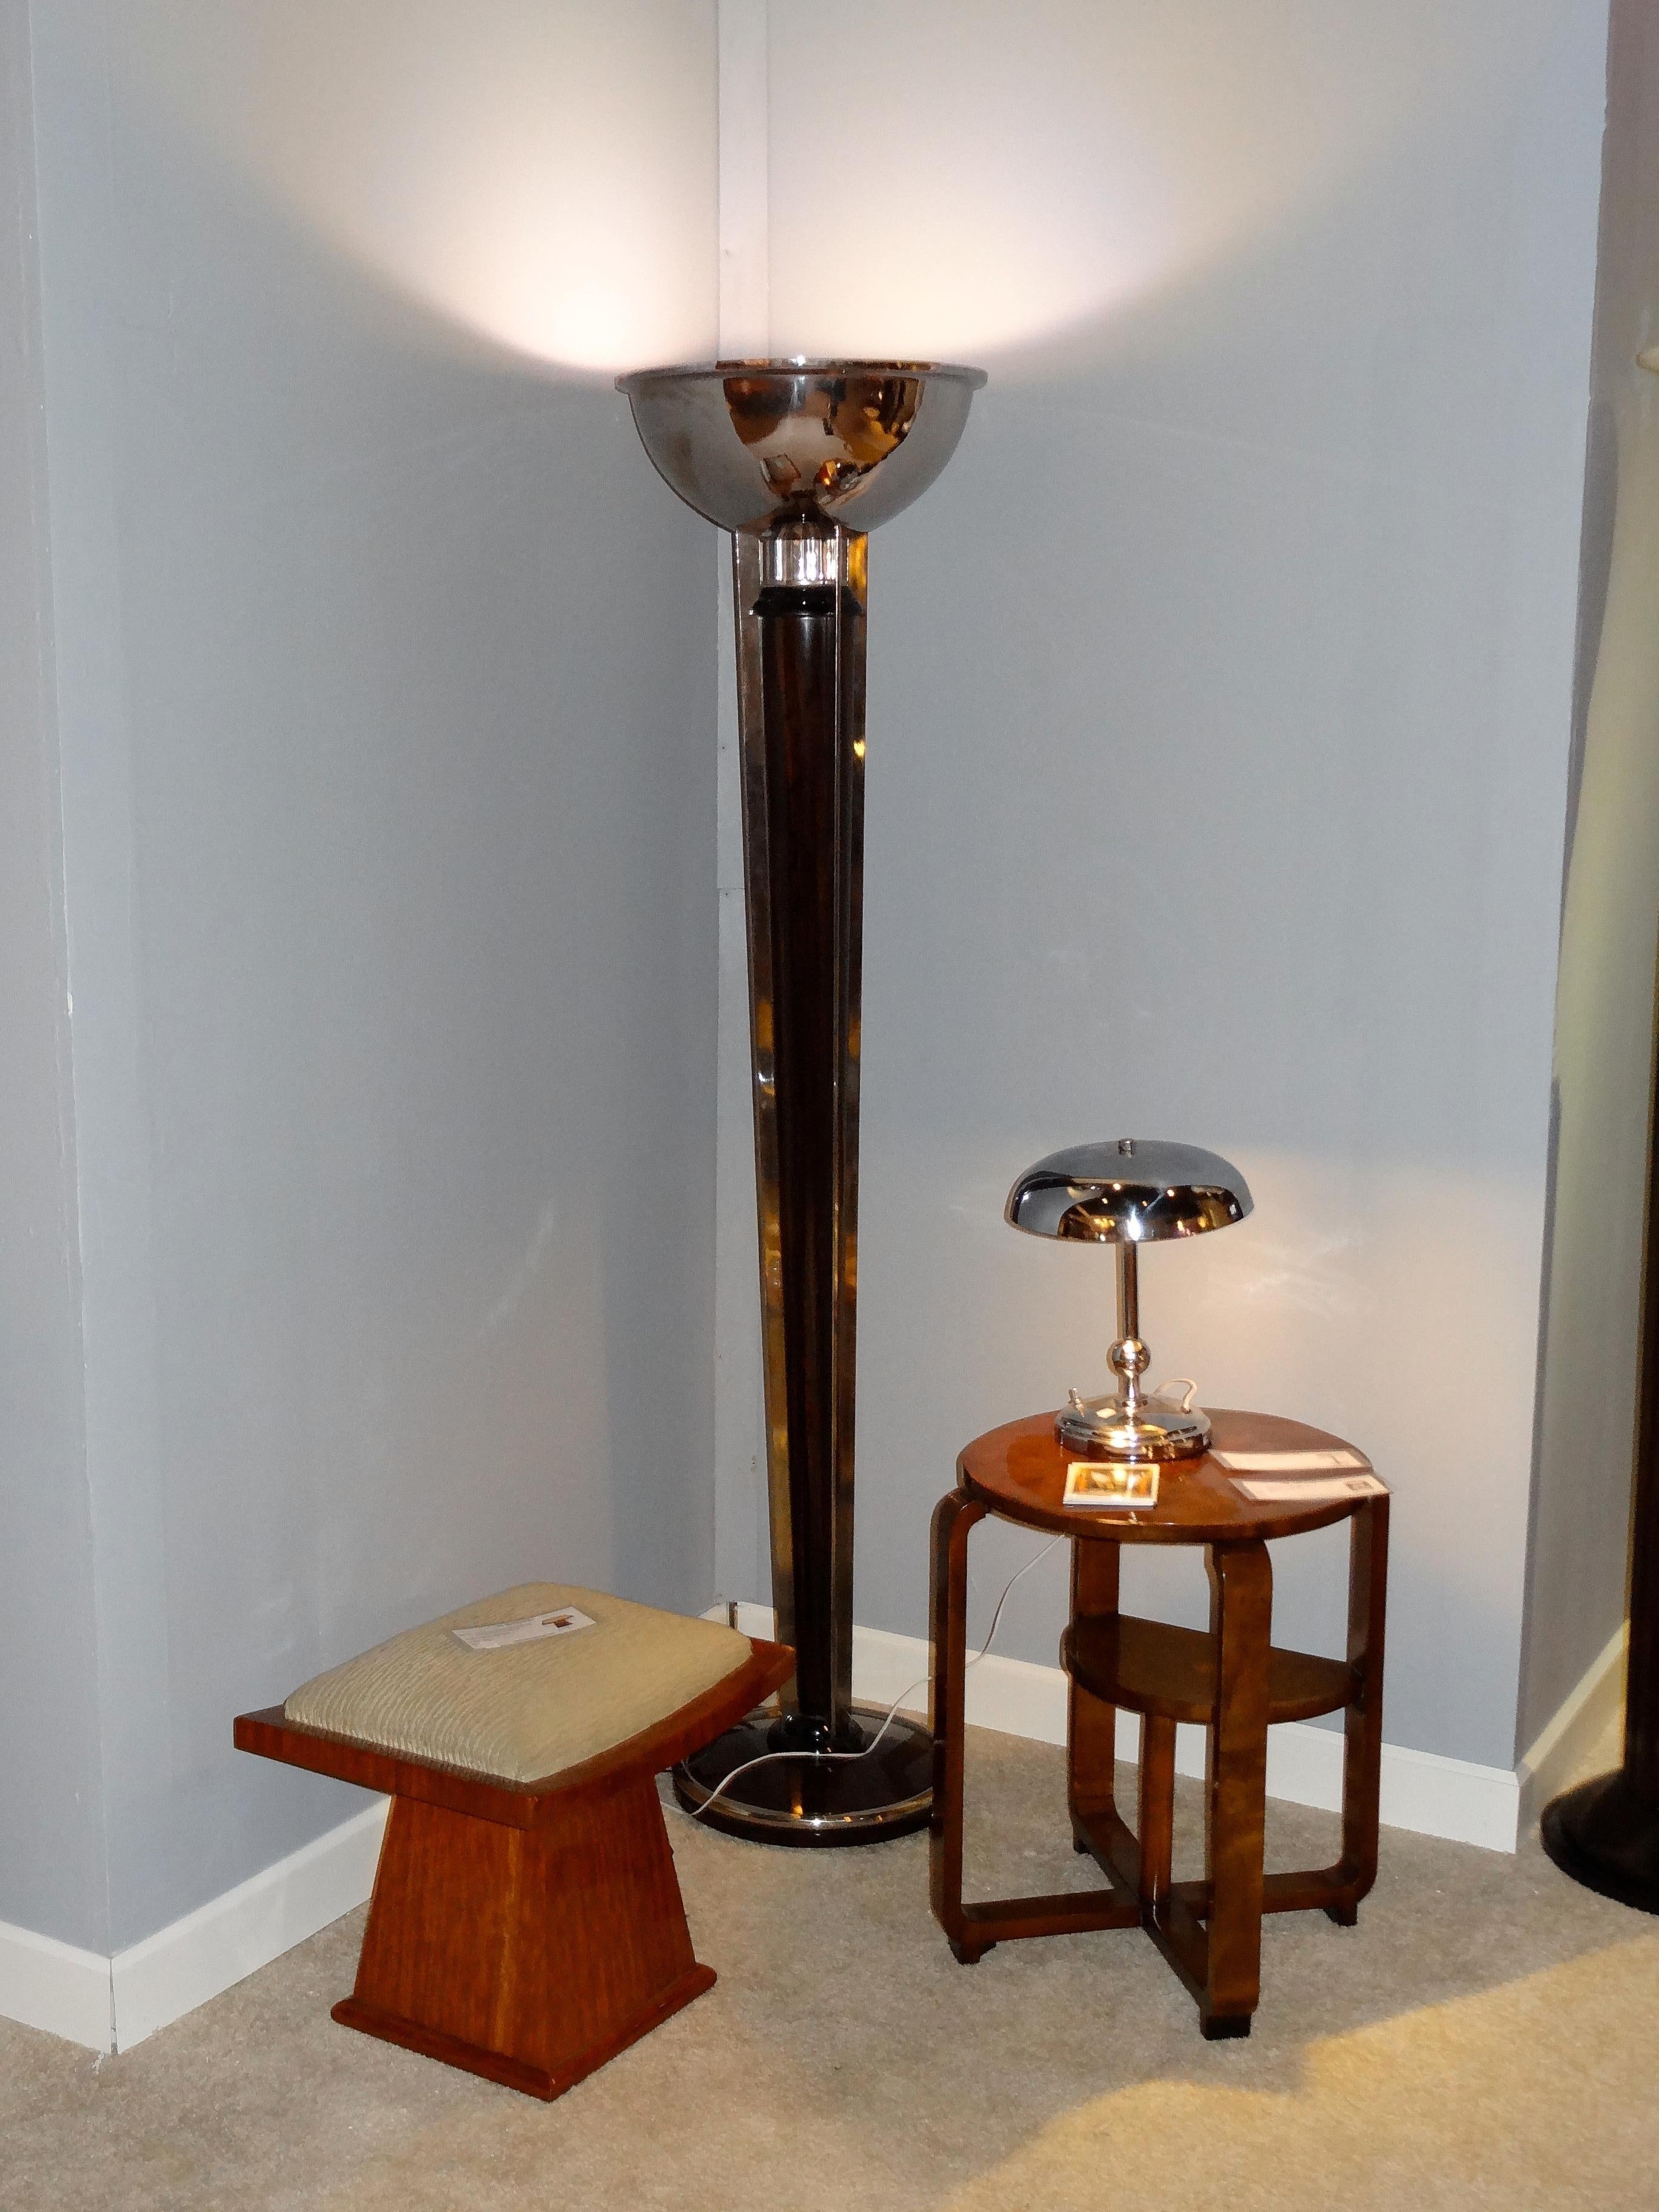 2 floor lamps Art Deco

Materials: wood, glass, chrome
France
1930
You want to live in the golden years, those are the floor lamps that your project needs.
We have specialized in the sale of Art Deco and Art Nouveau styles since 1982.
Pushing the